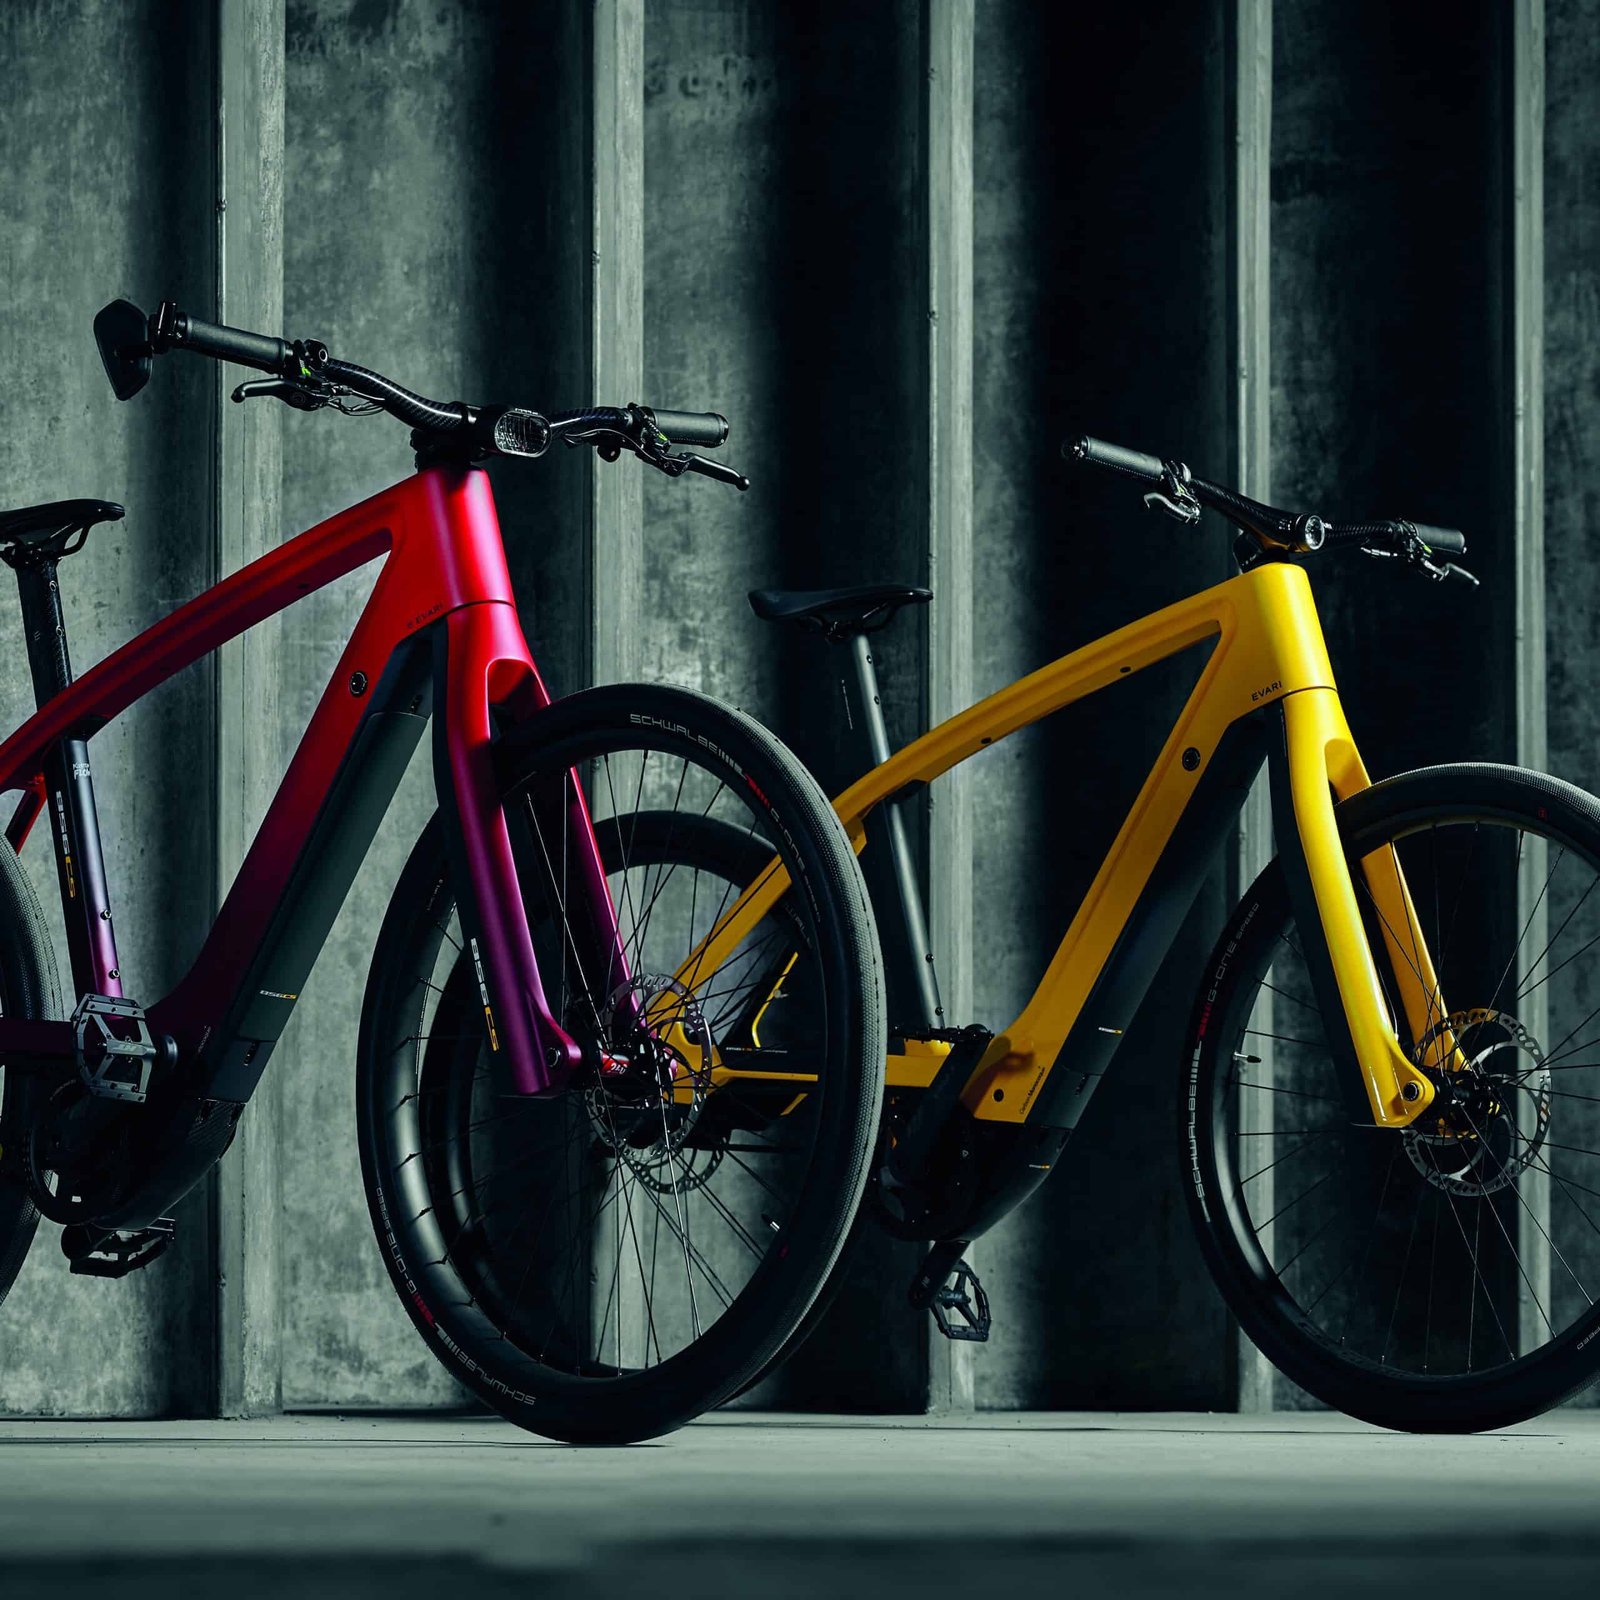 Two electric bikes with vibrant colors are parked in front of a concrete wall.